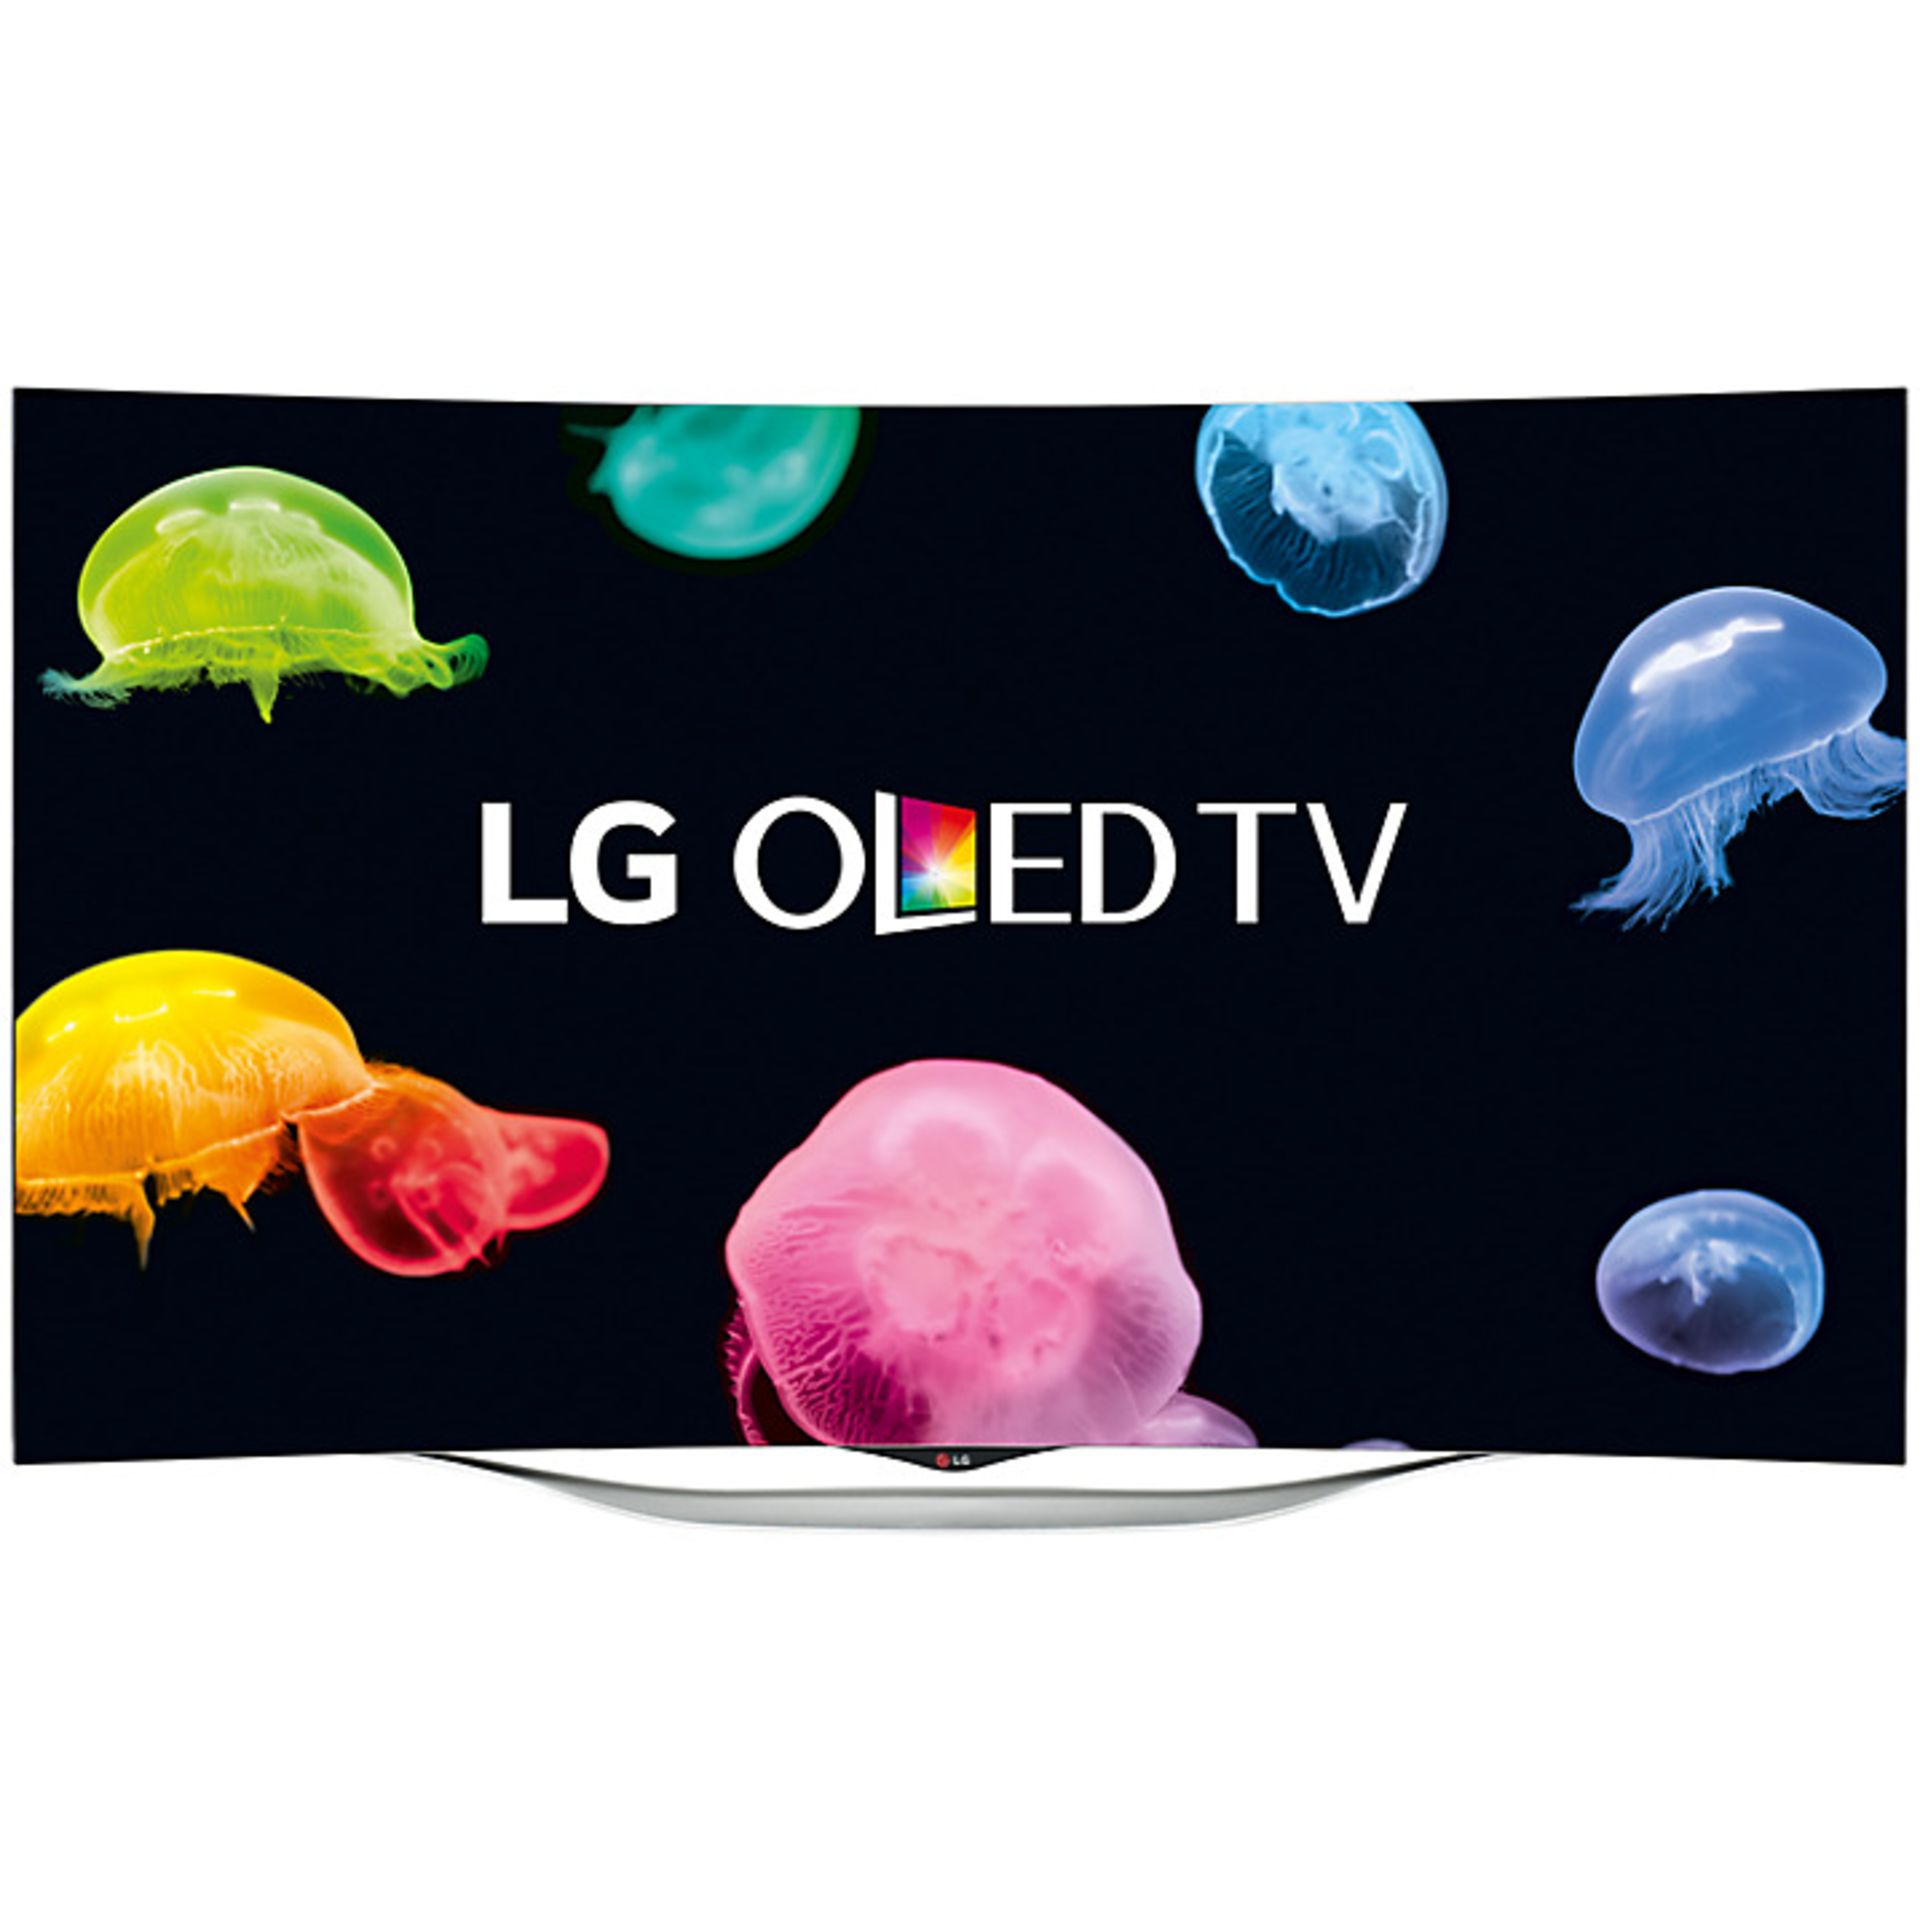 V *TRADE QTY* Grade A 55EC930V 55" LG OLED Curved Smart 3D TV With Freeview HD - RRP: £3699.97 Argos